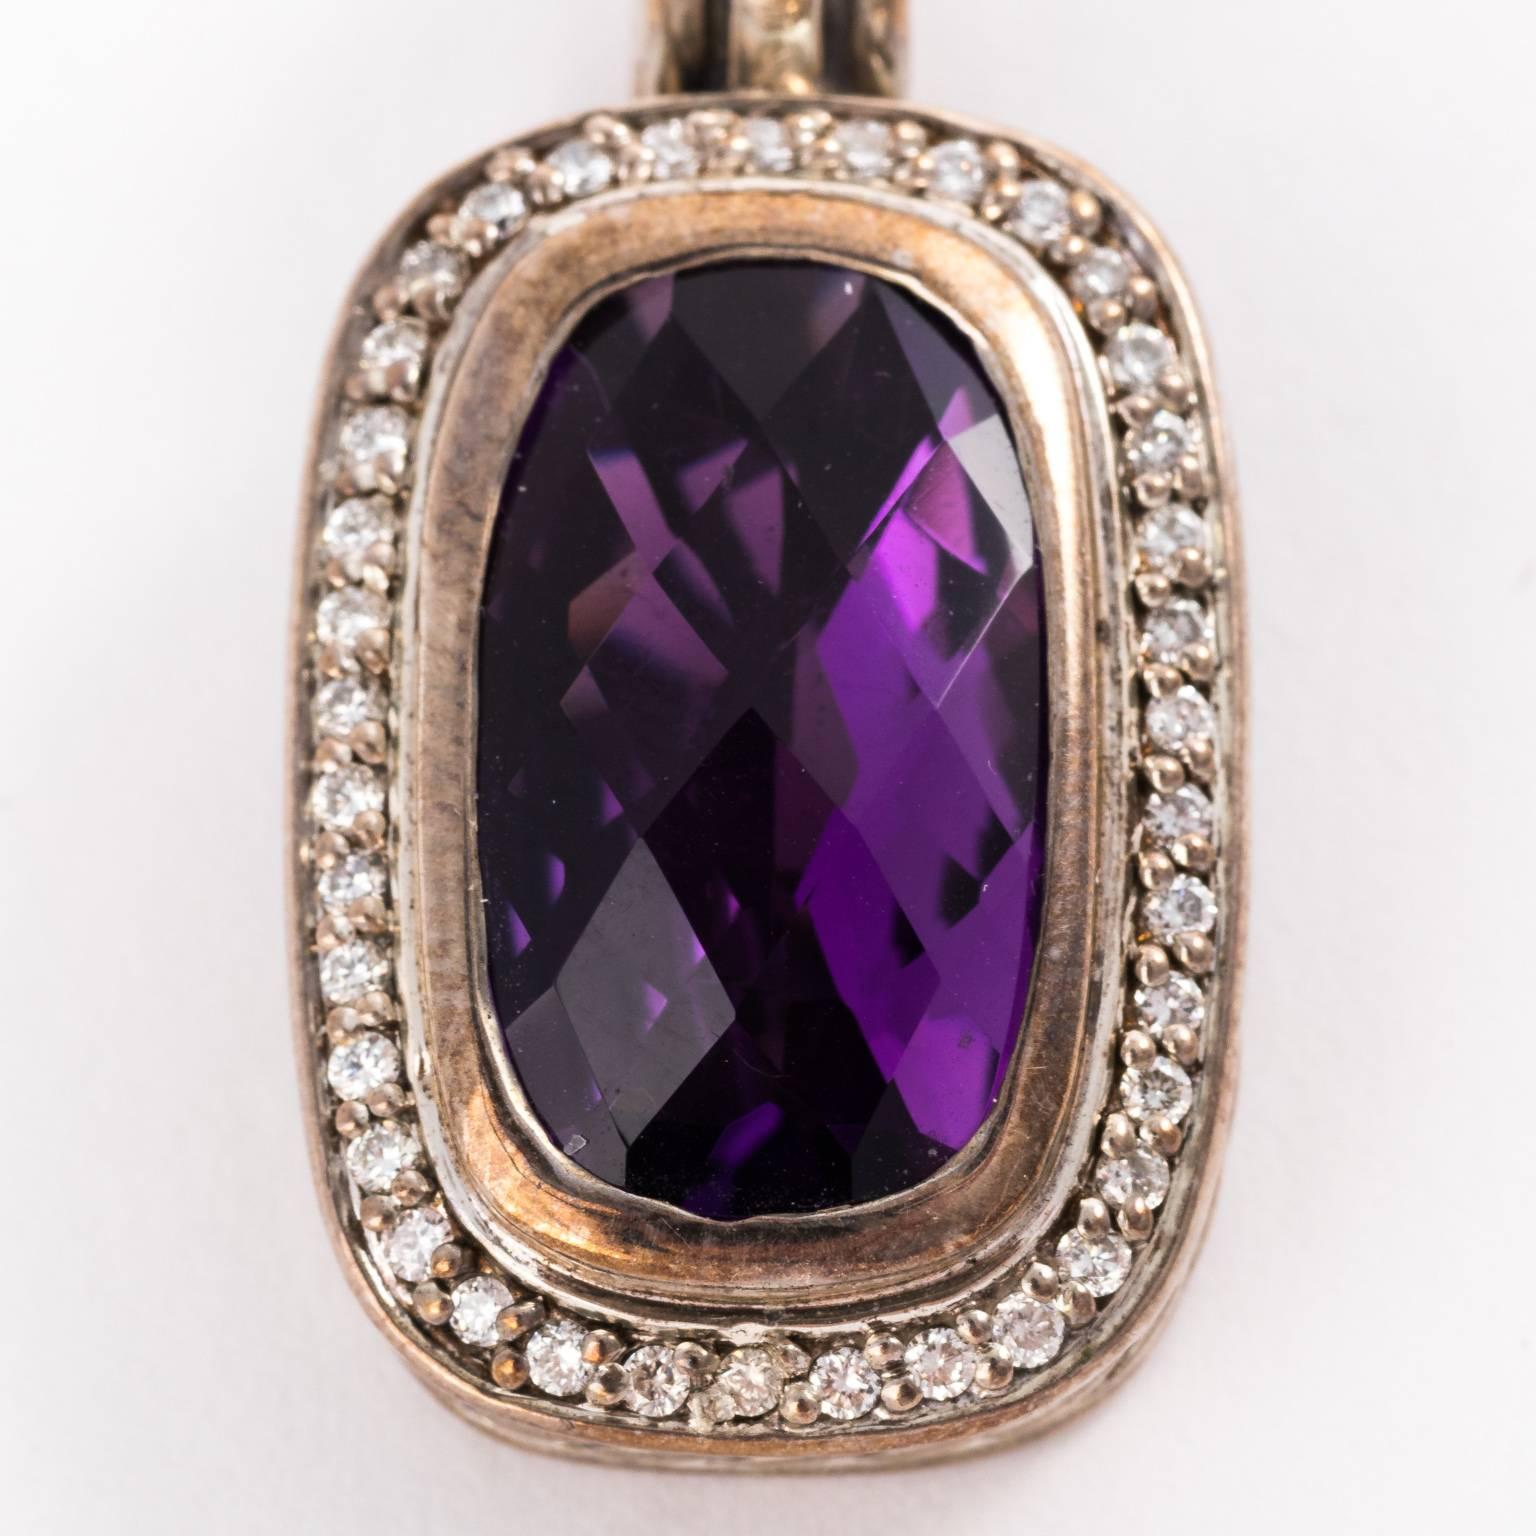 Contemporary David Yurman sterling silver and Amethyst pendant framed with diamonds.
